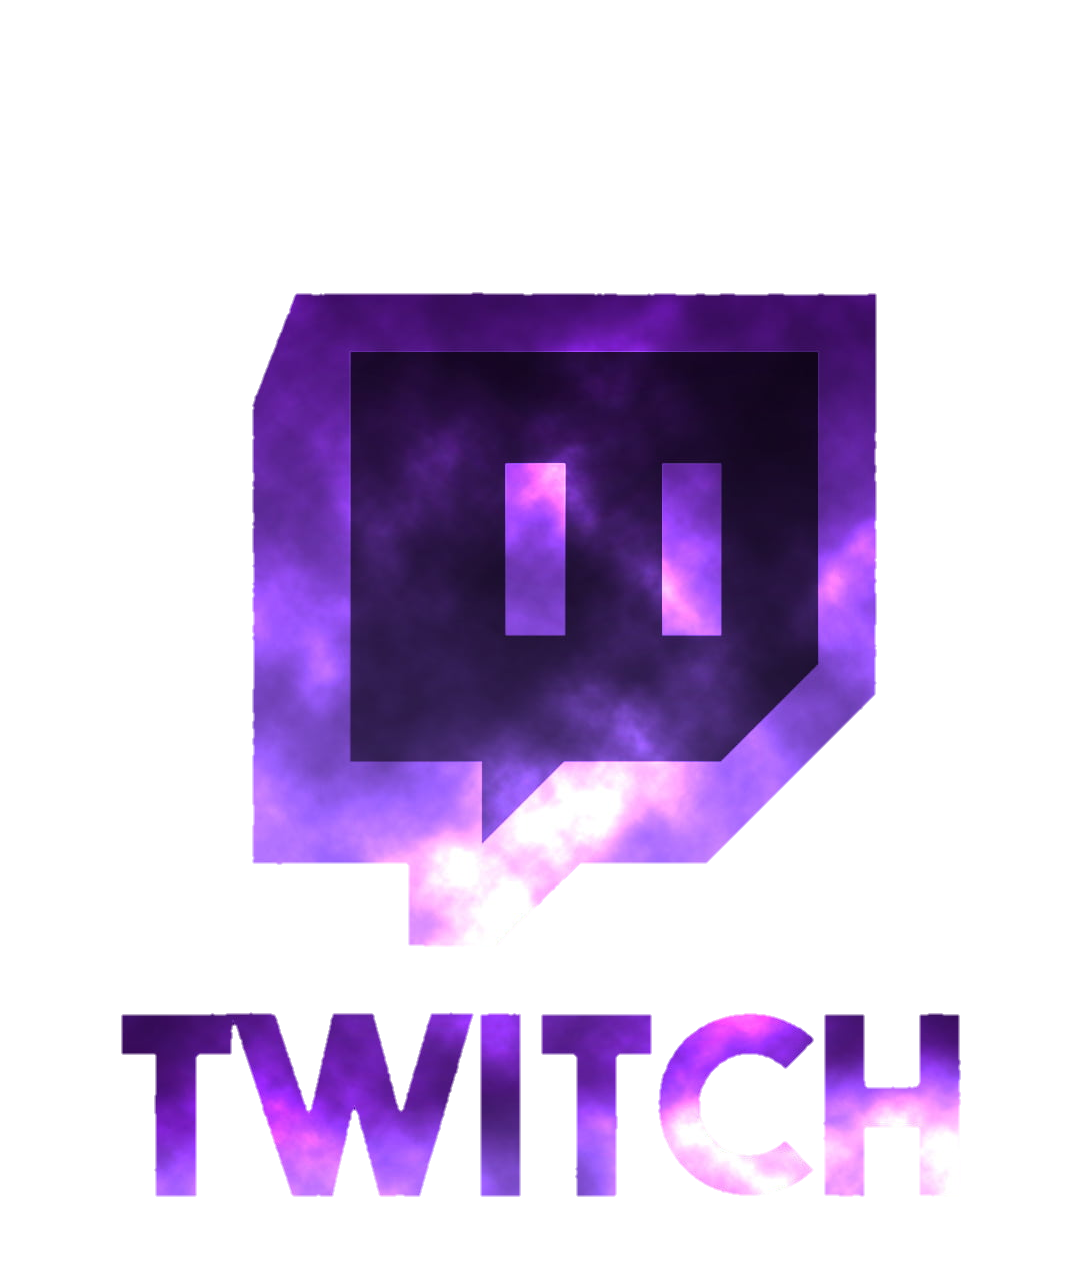 twitch-logo-png-from-pngfre-23